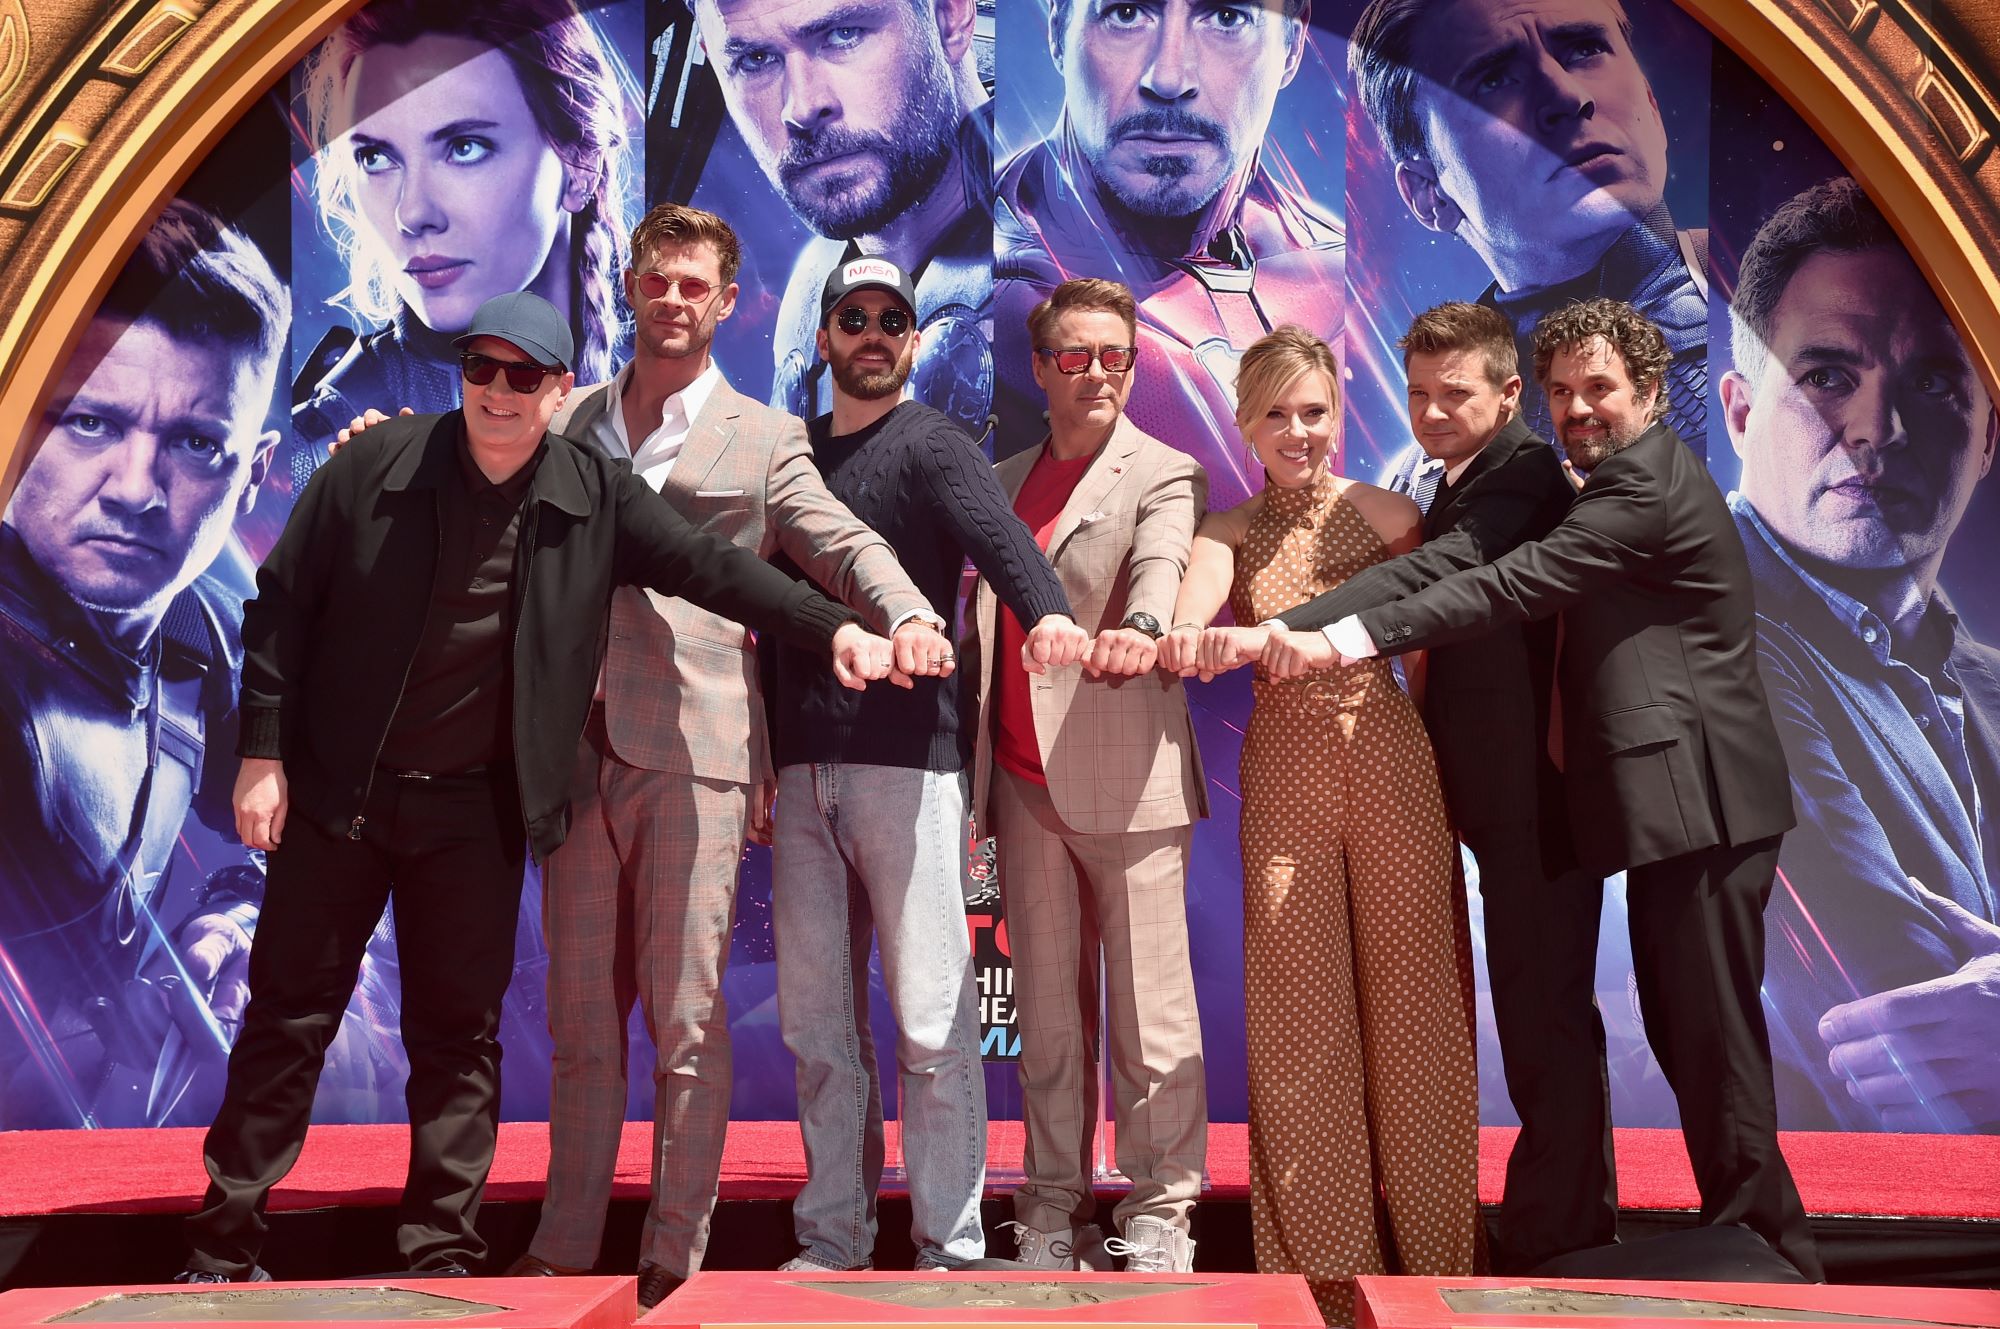 President of Marvel Studios Kevin Feige and 'Avengers: Endgame' stars Chris Hemsworth, Chris Evans, Robert Downey Jr., Scarlett Johansson, Jeremy Renner, and Mark Ruffalo bring their fists together and pose for pictures in front of their character posters for the movie.